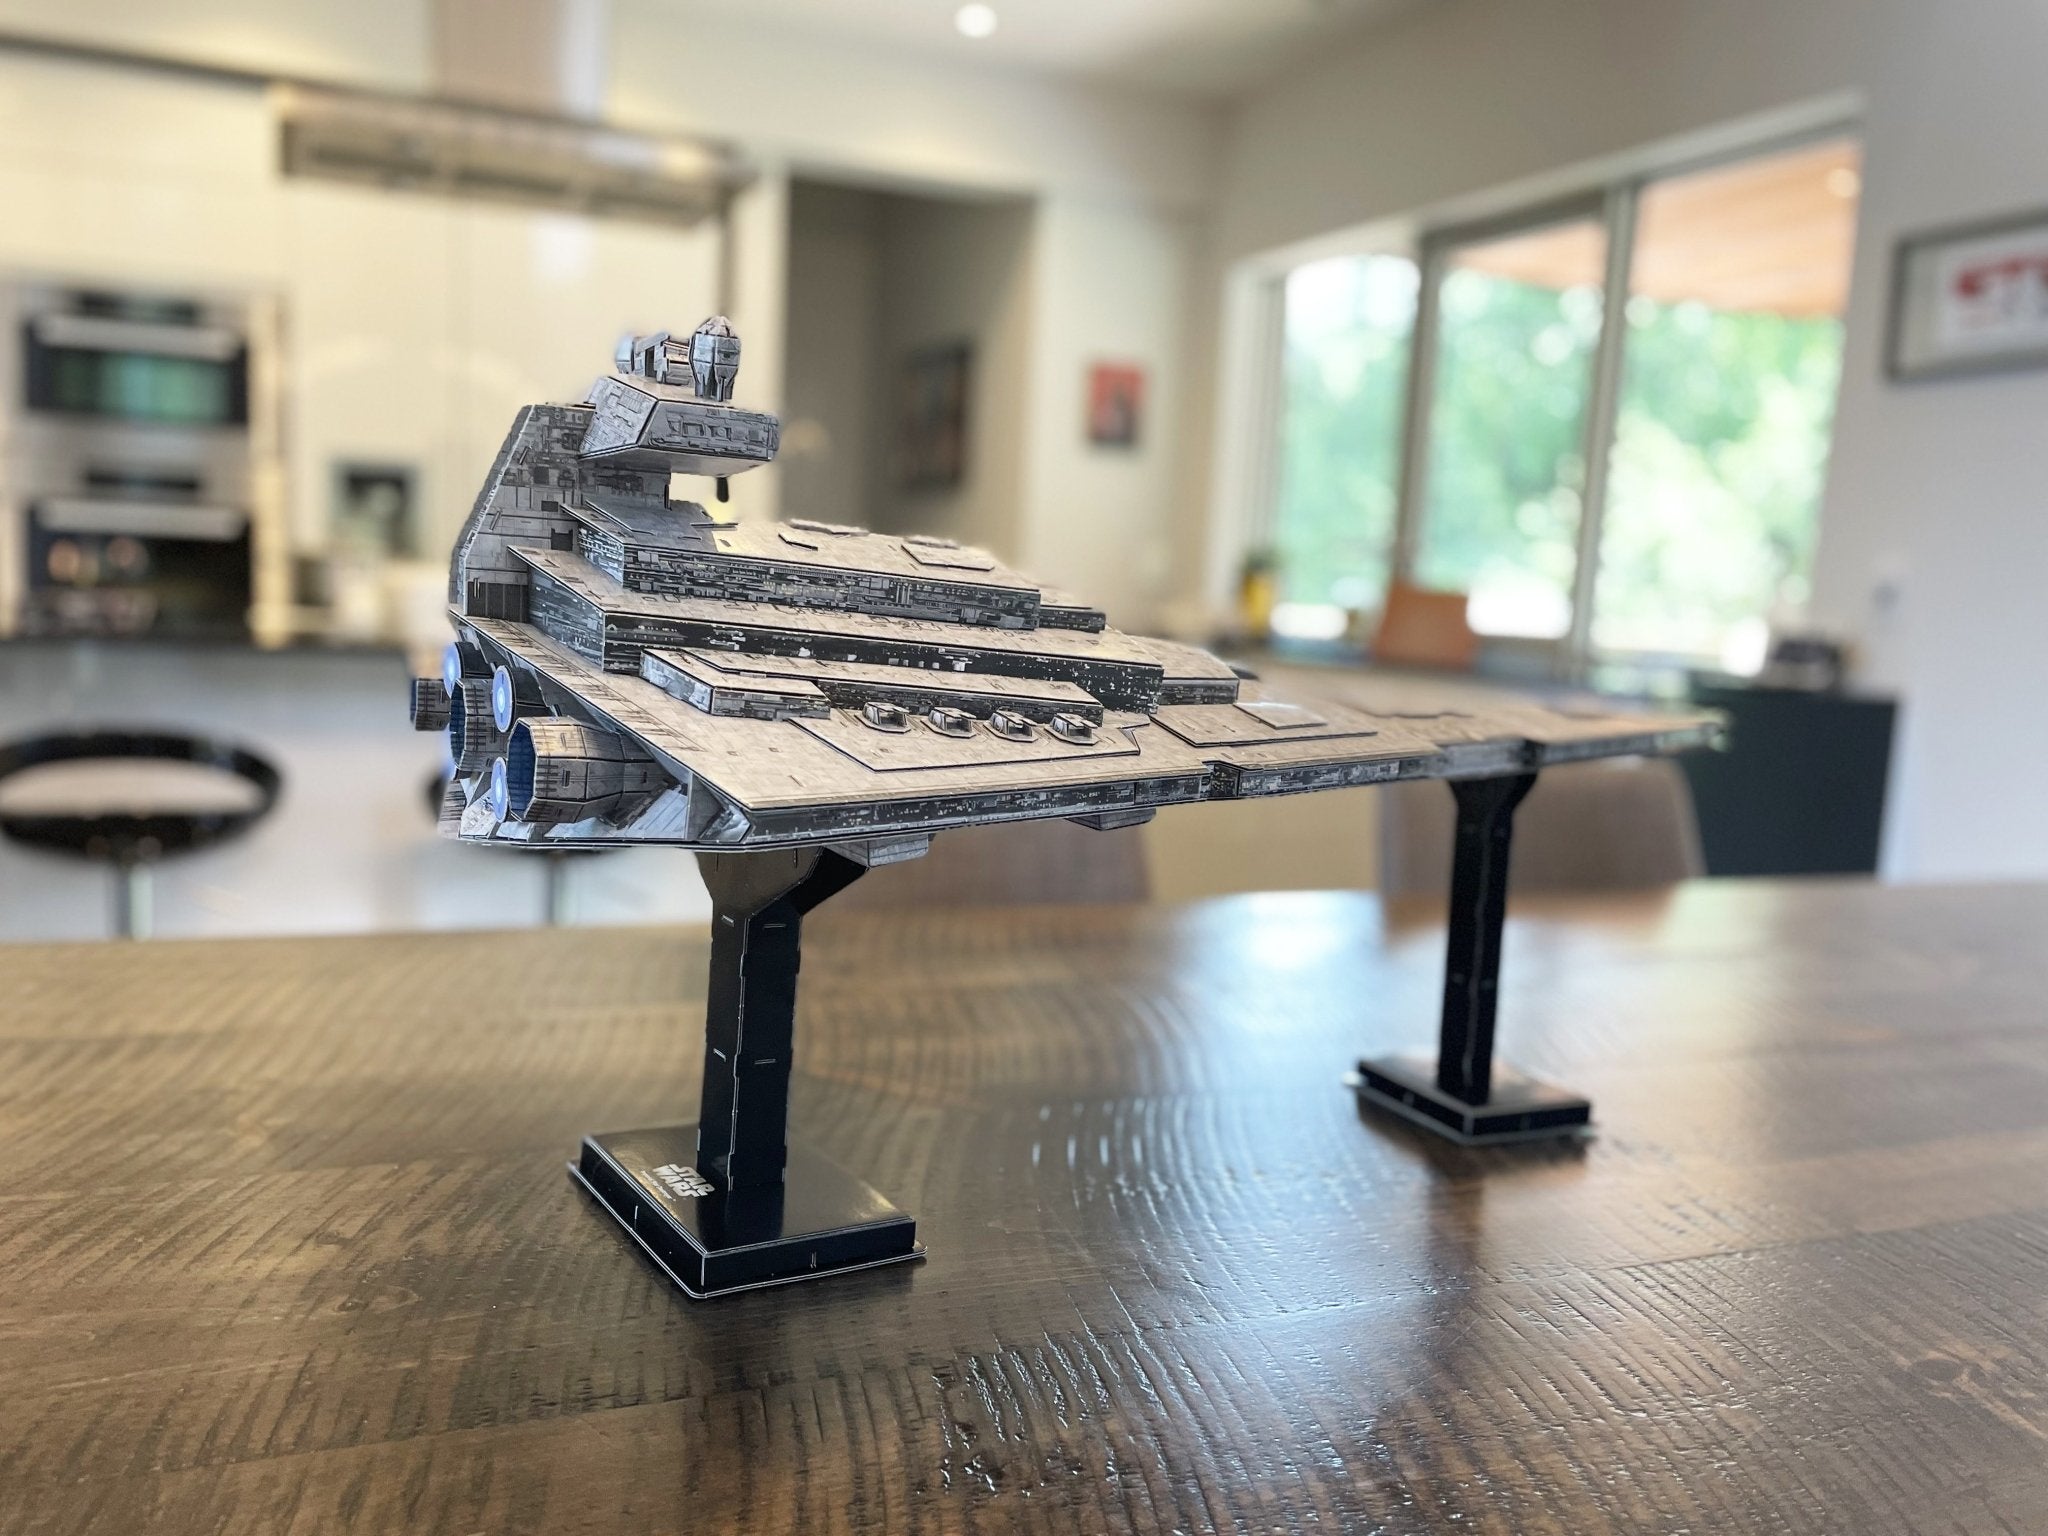 Star Wars Imperial Star Destroyer Launching 01.01.224D Puzzle | 4D Cityscape4D Puzz
